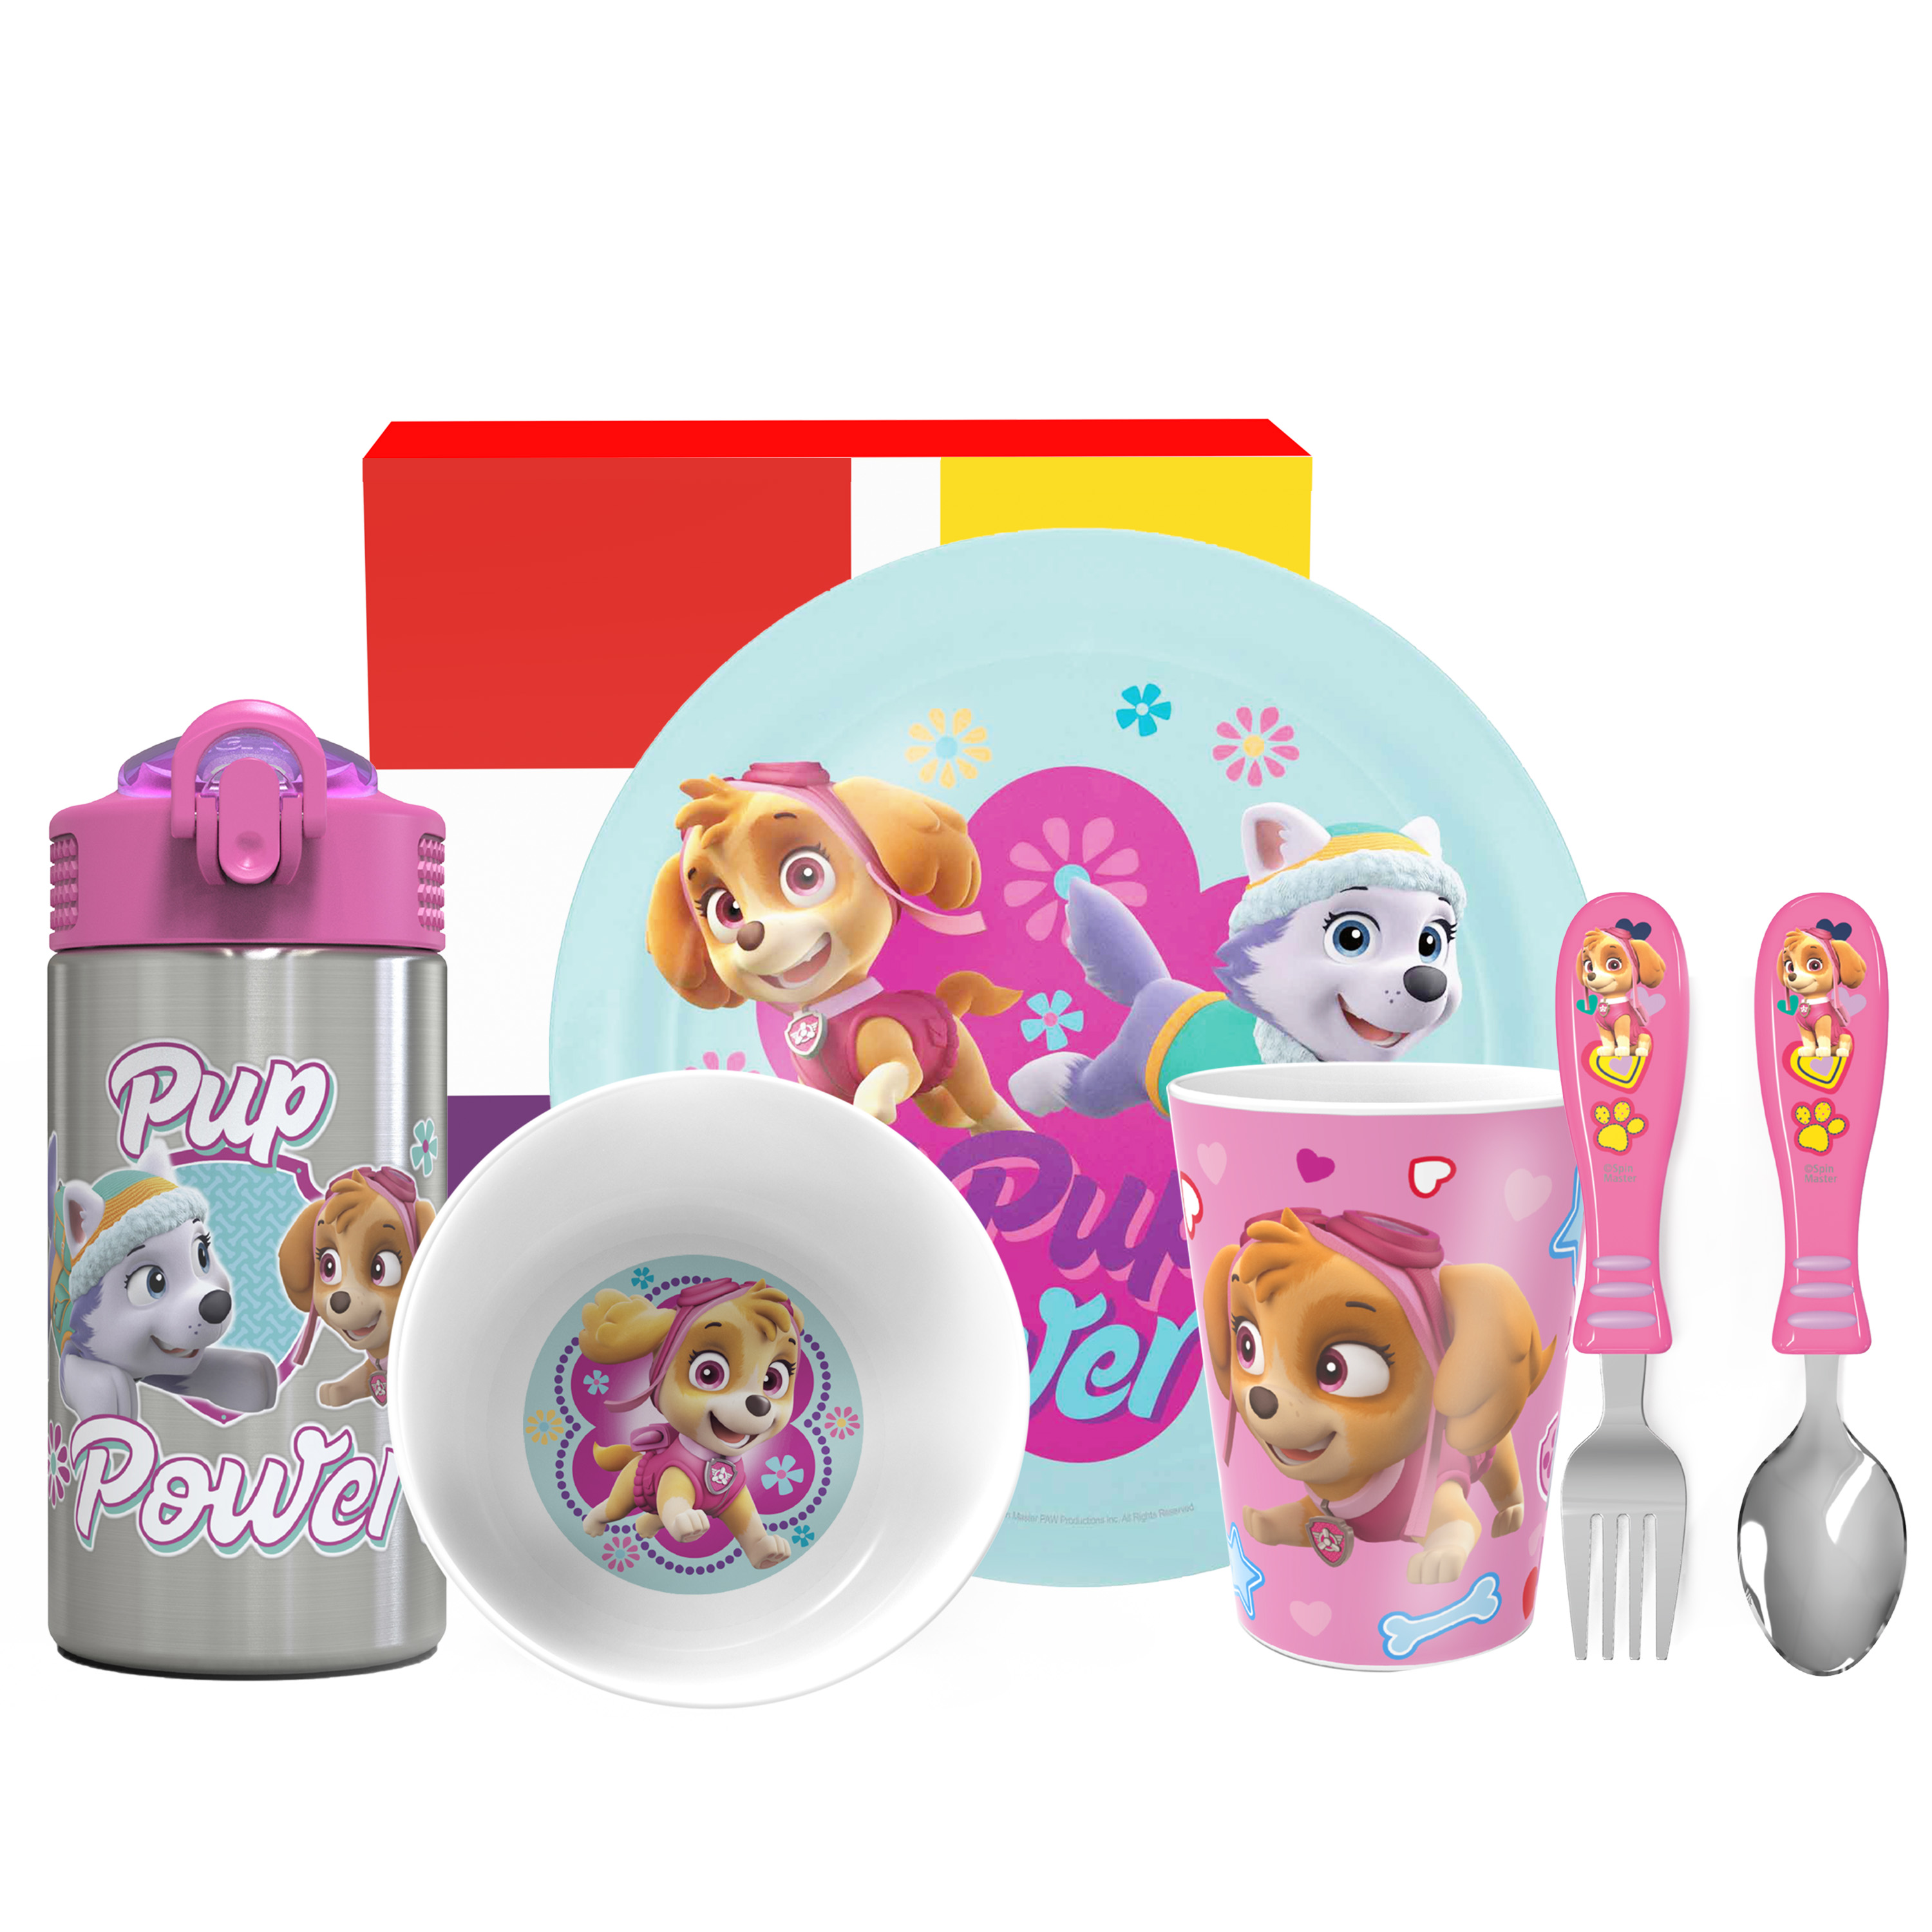 Paw Patrol Plate, Bowl, Tumbler, Water Bottle and Flatware Set for Kids, Everest and Skye, 6-piece set slideshow image 6